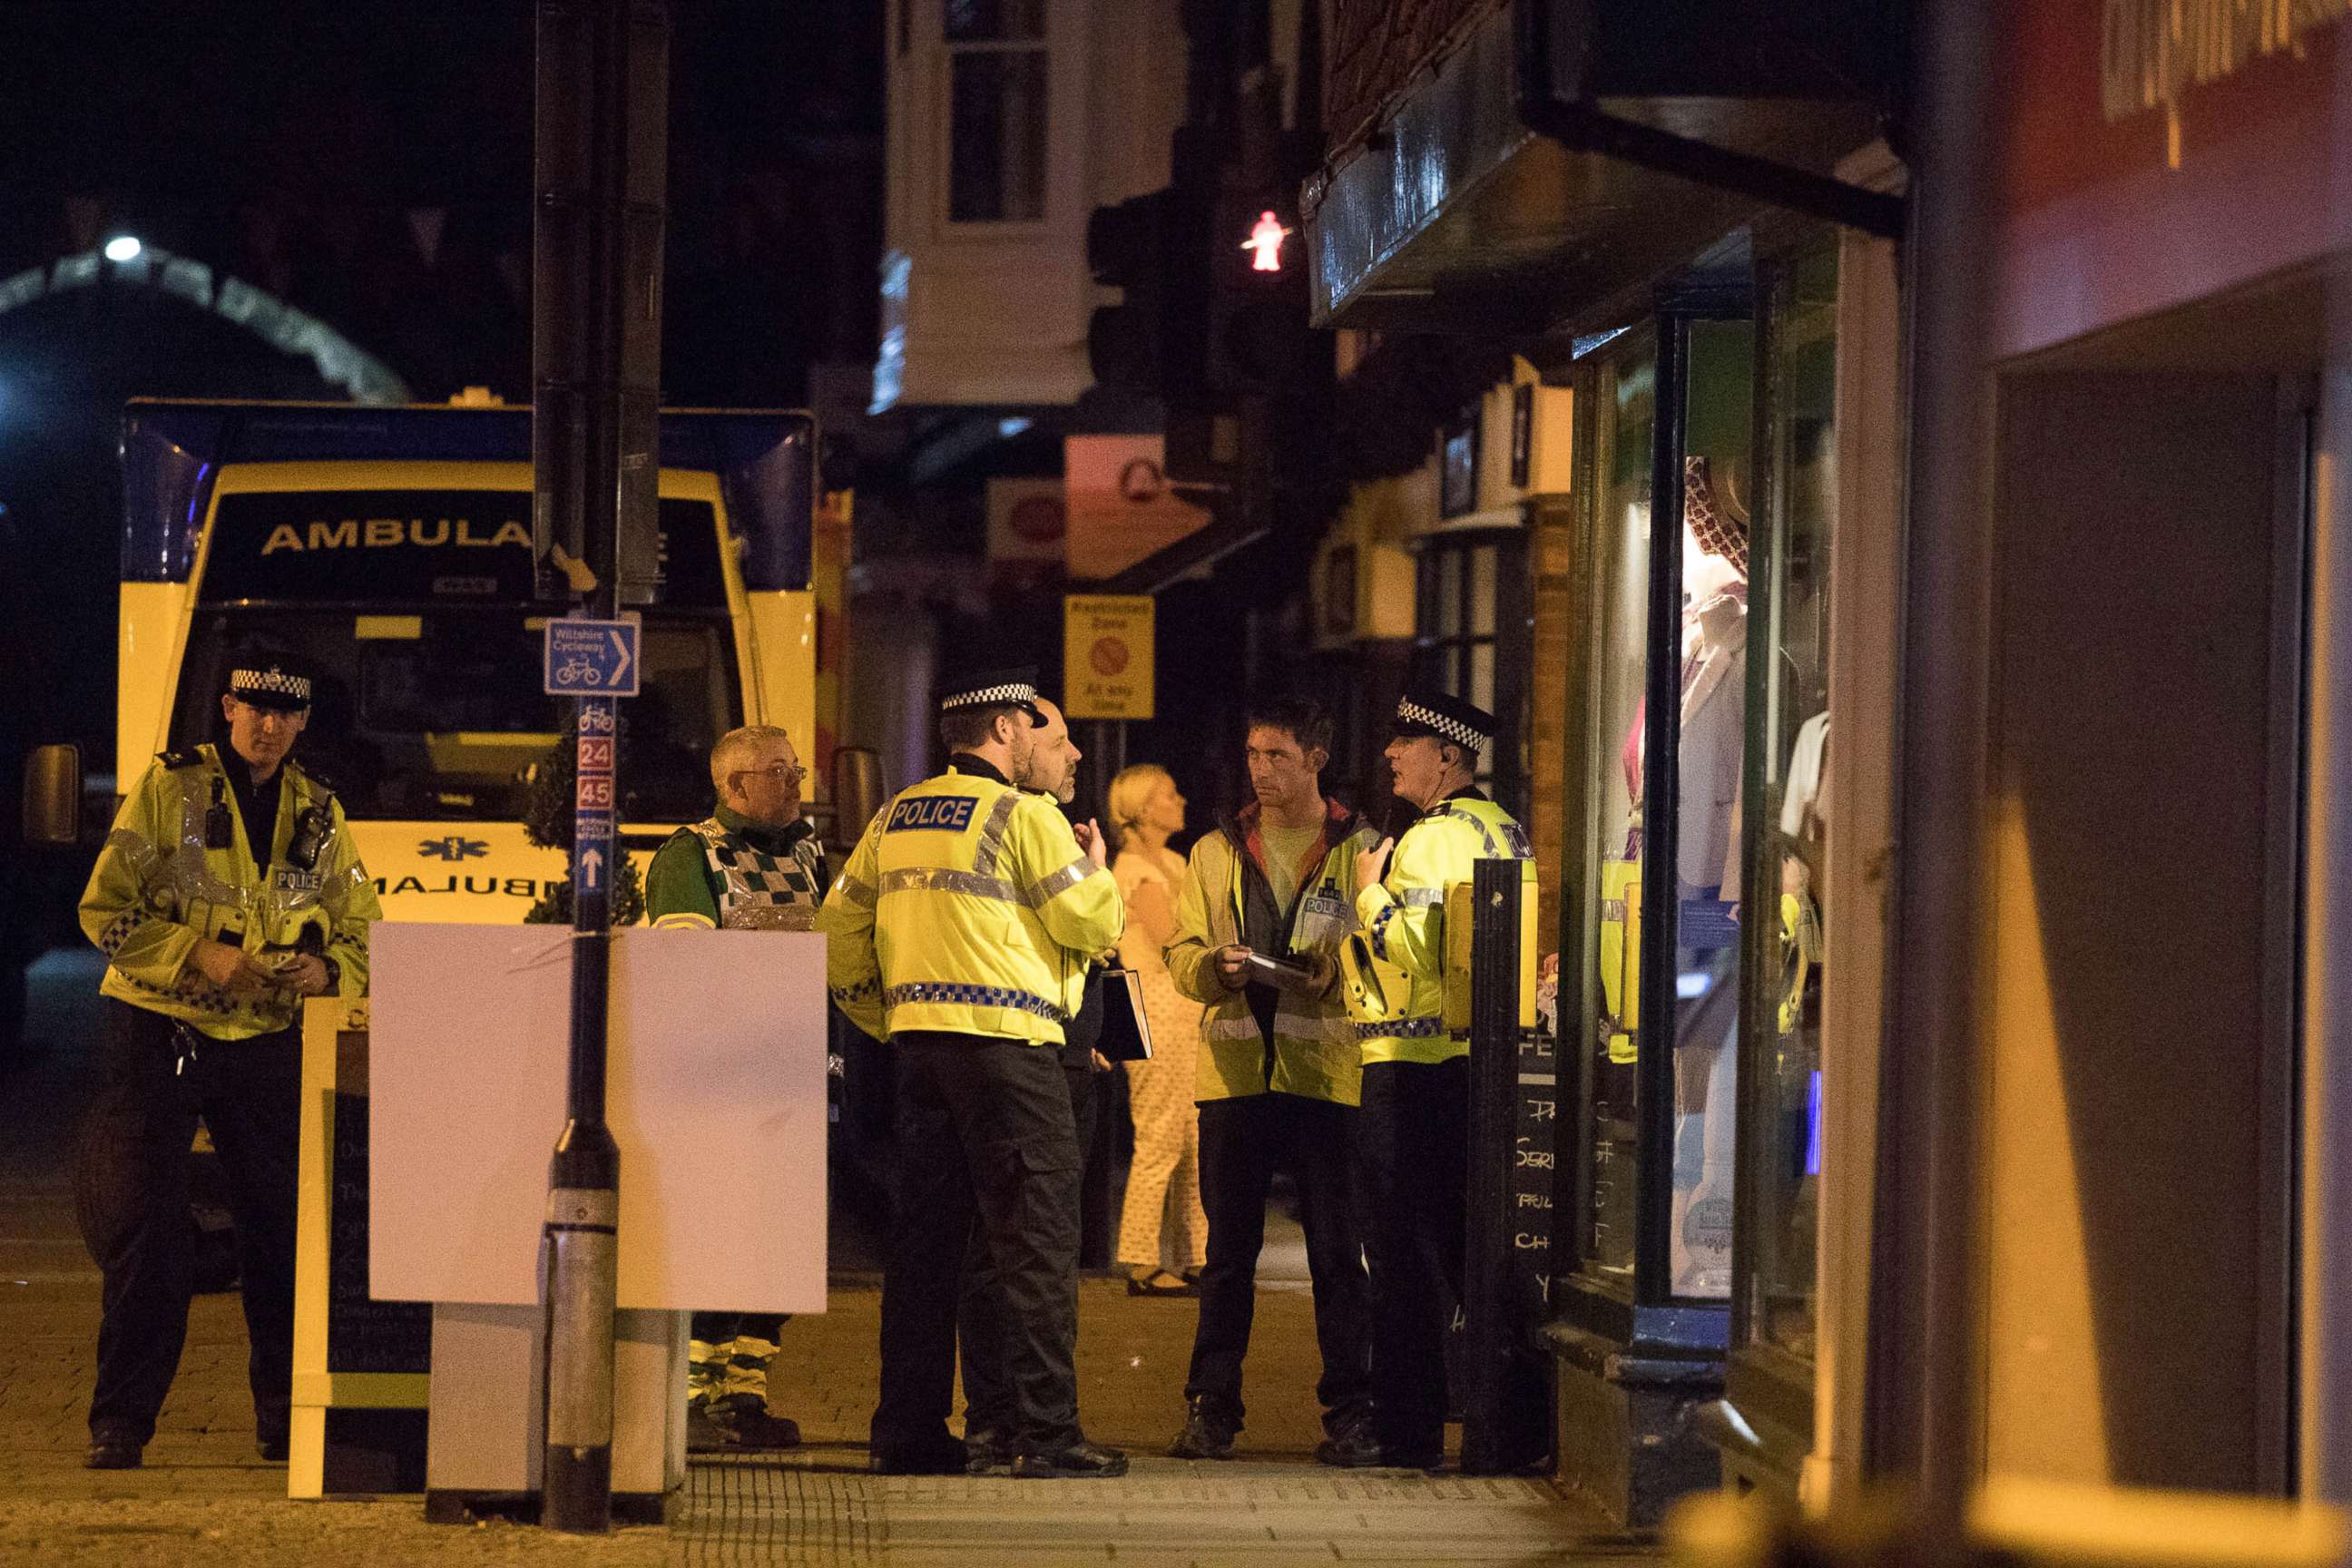 PHOTO: Police and other emergency service personal gather outside Prezzo restaurant which has been closed after two people became ill earlier this evening on Sept. 16, 2018 in Salisbury, England.